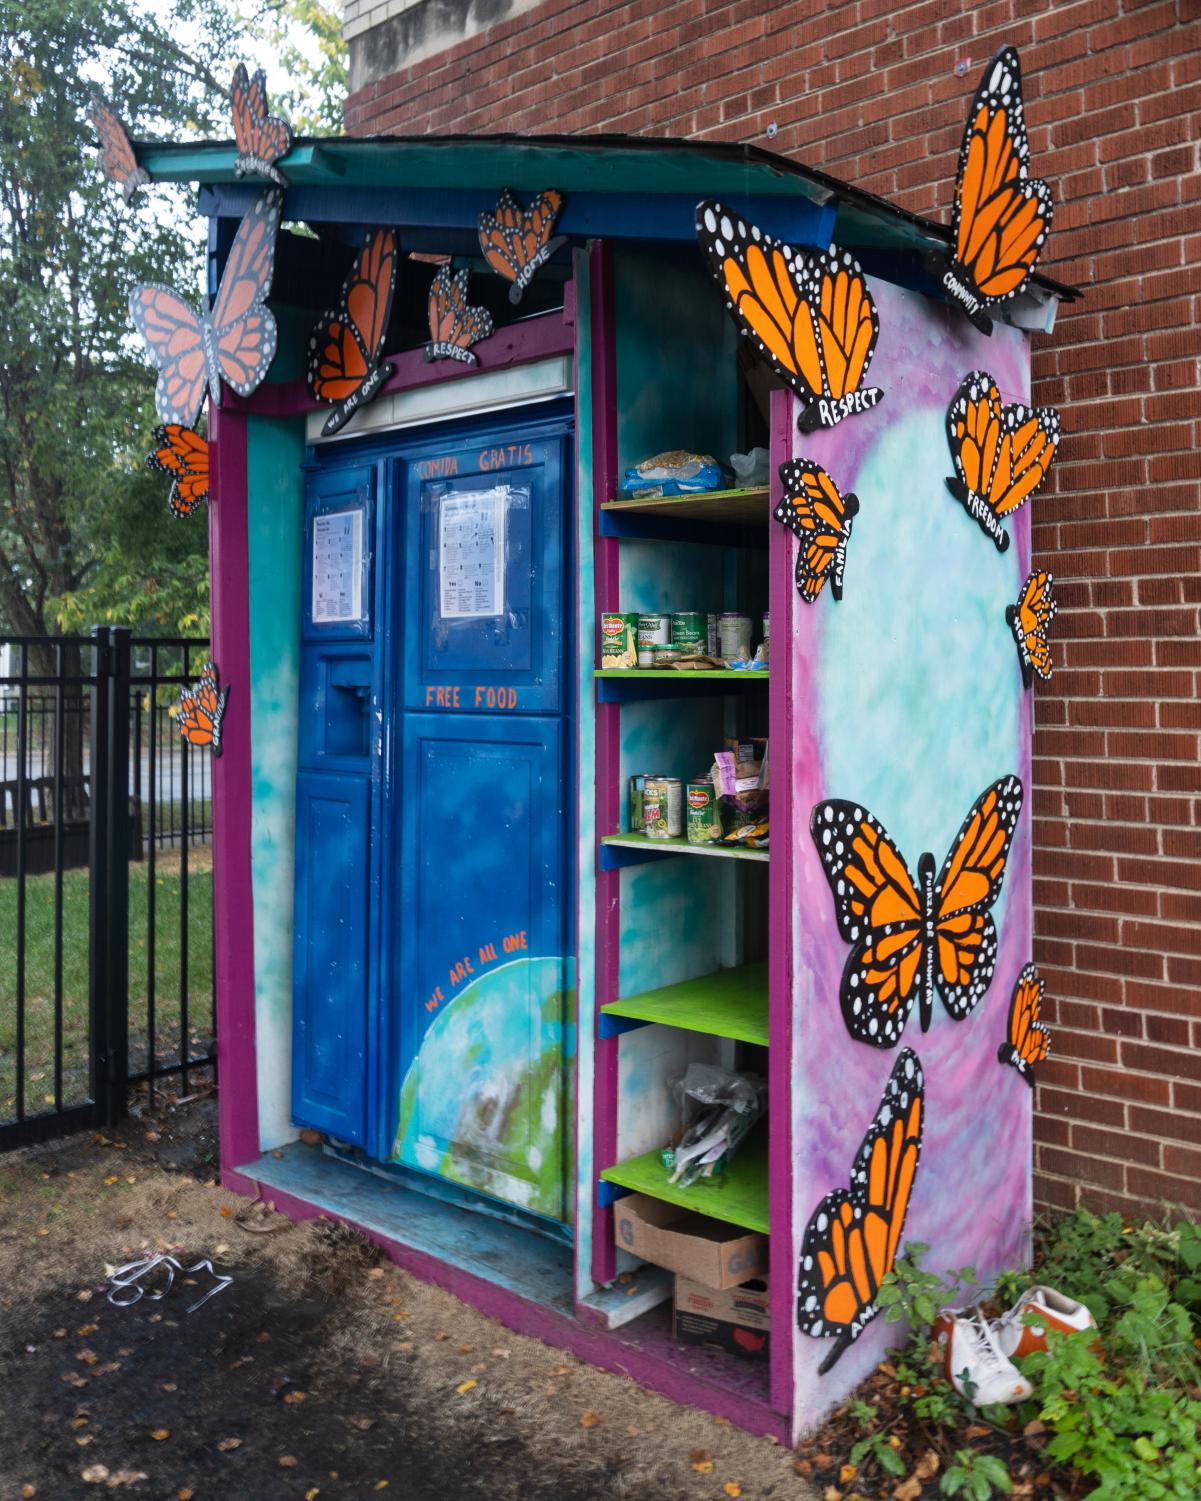 The+community+fridge+outside+Childcare+Network+of+Evanston+is+decorated+with+butterfly+decals.